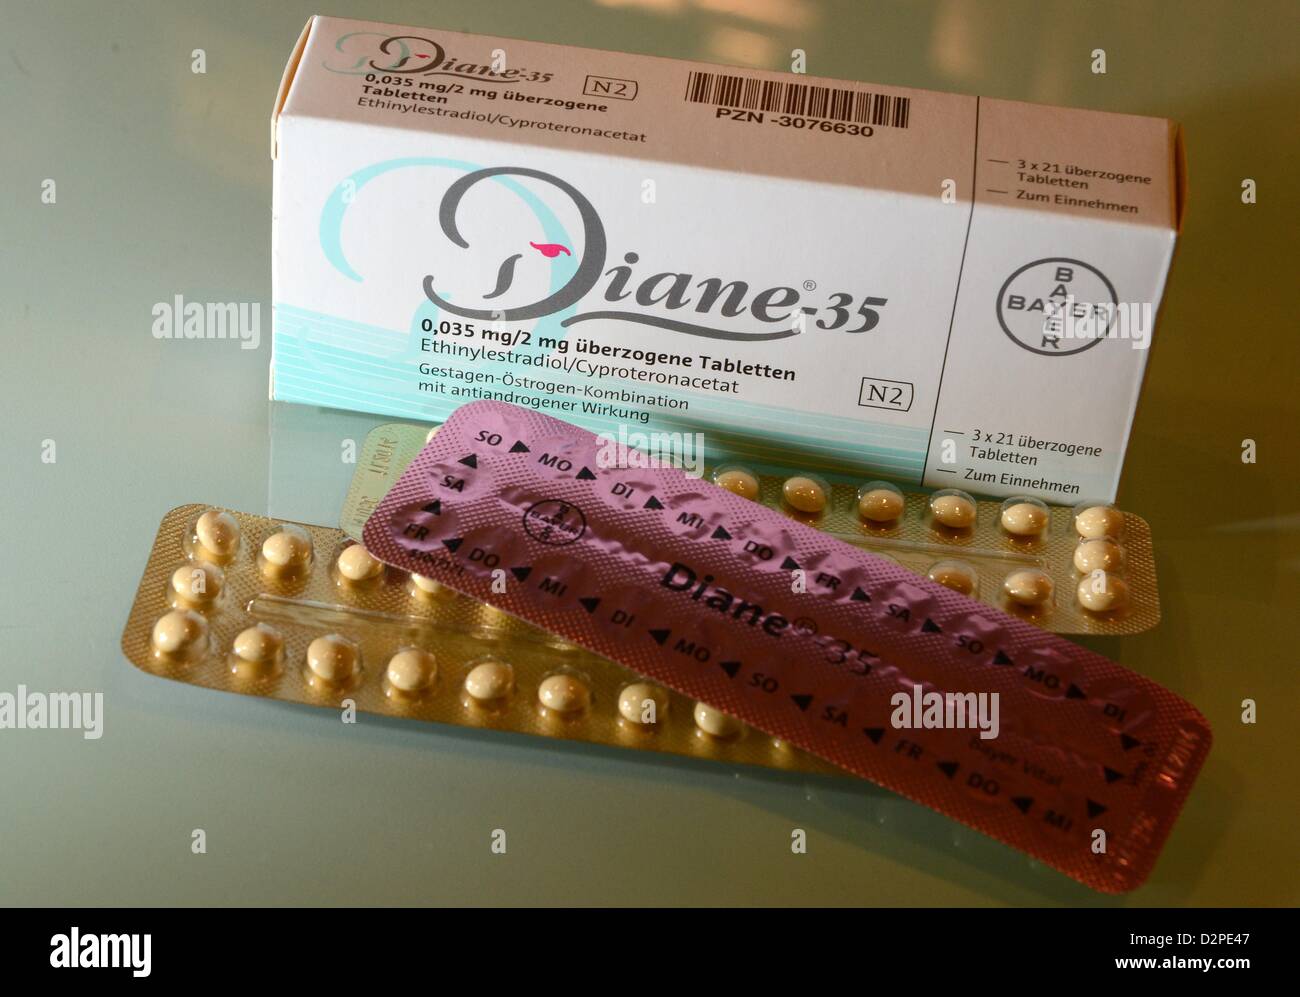 Diane 35 High Resolution Stock Photography and Images - Alamy